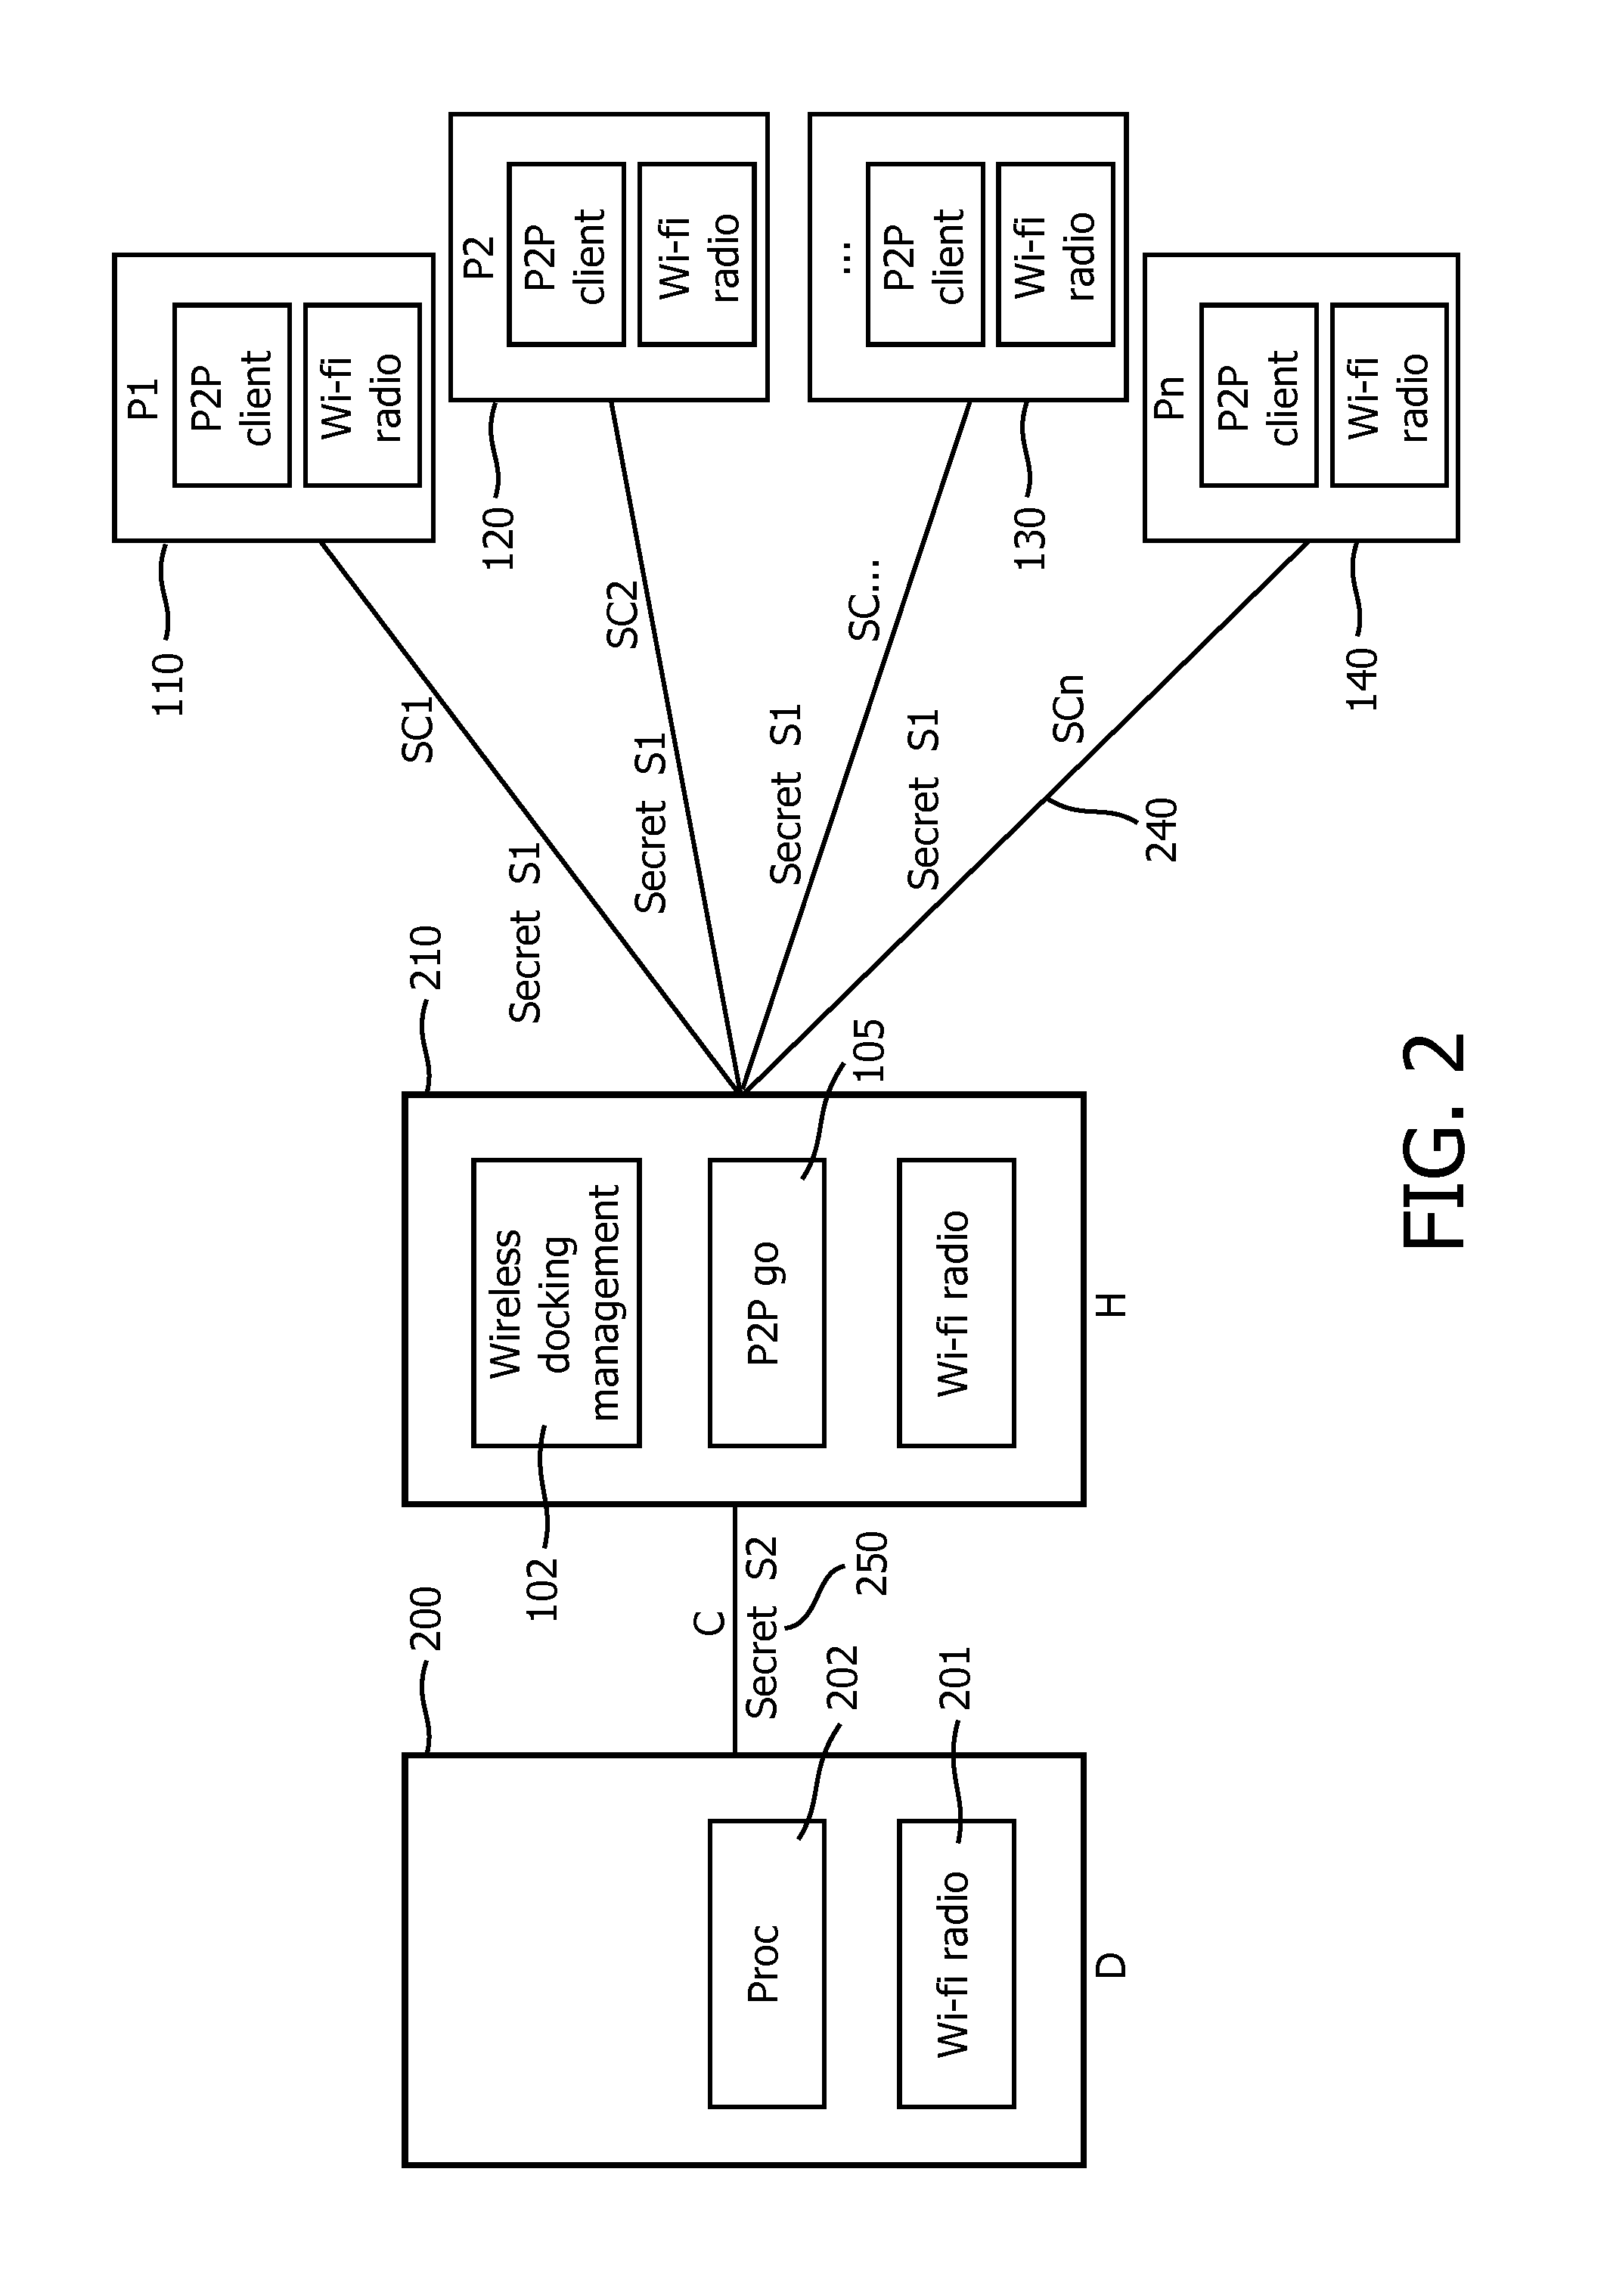 Method and devices for pairing within a group of wireless devices